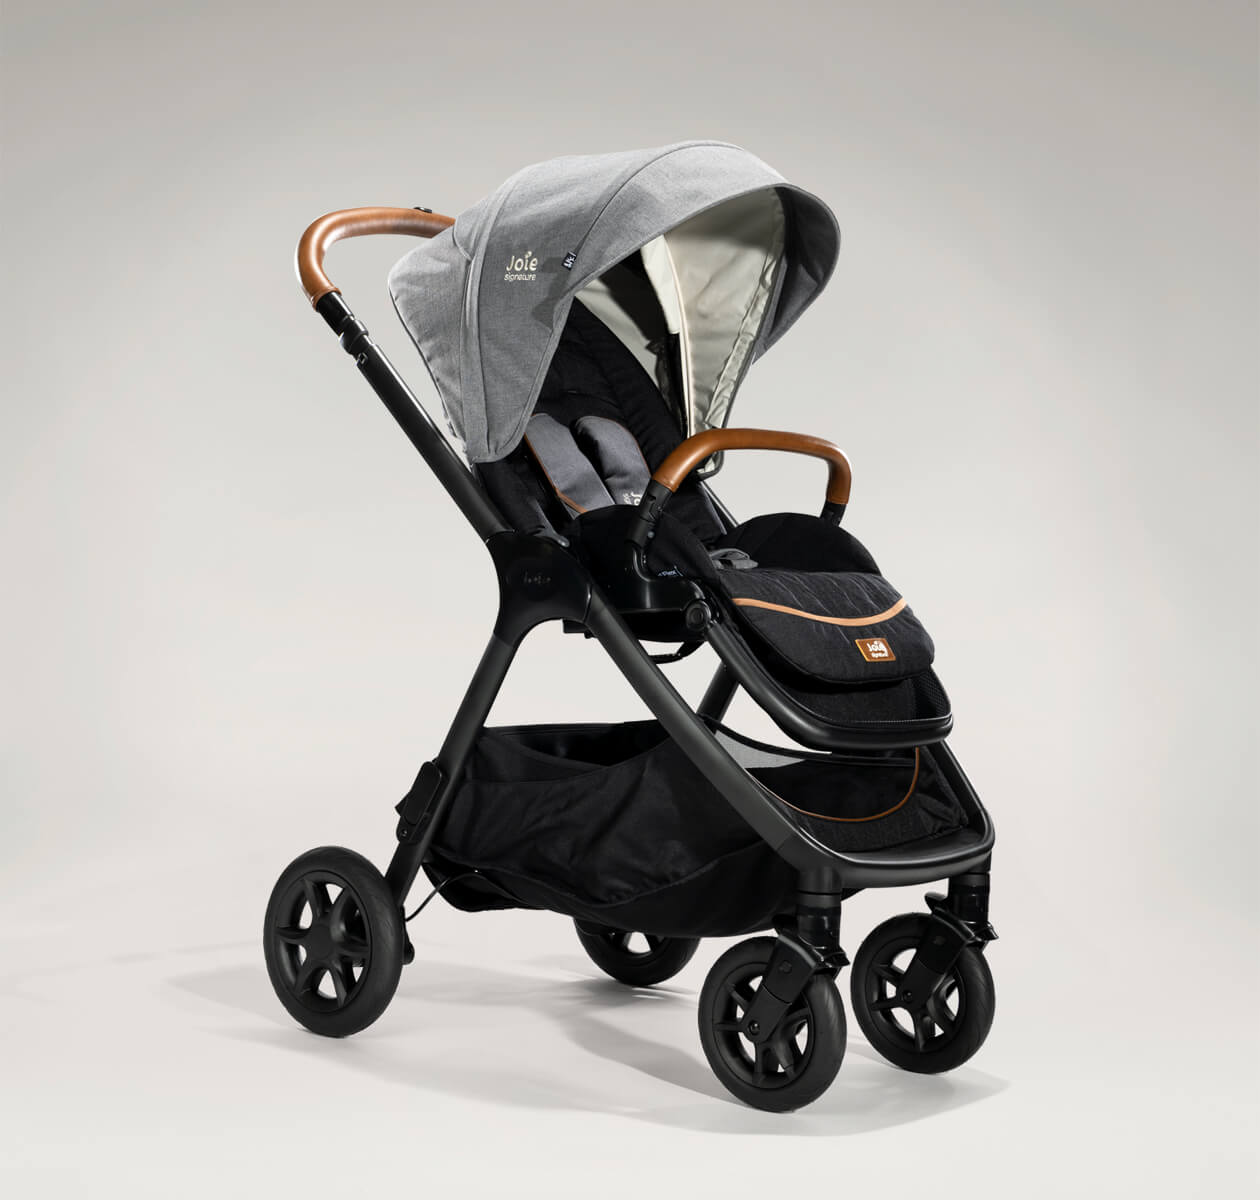 Joie finiti pram in light gray at an angle. 